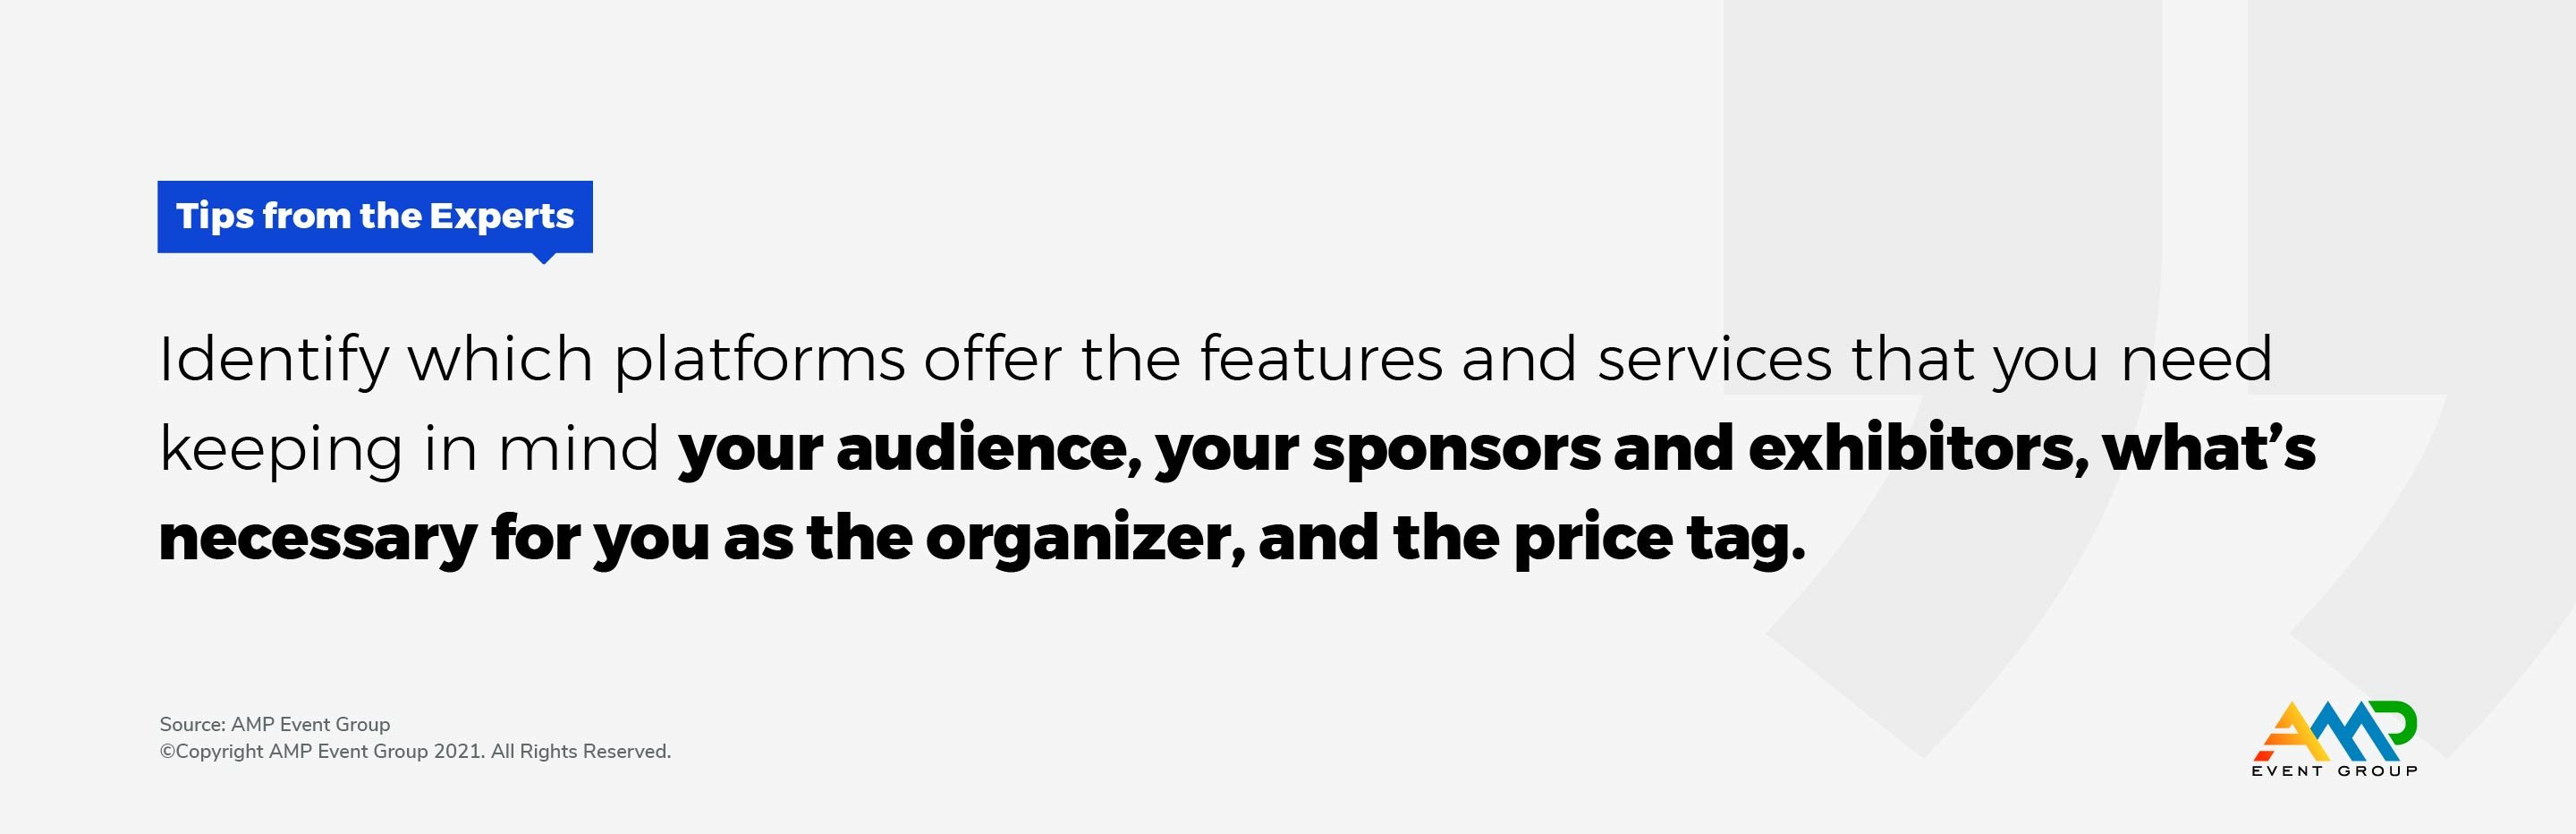 Amp Events: Virtual Event Platform - necessary for your as an organizer and price tag